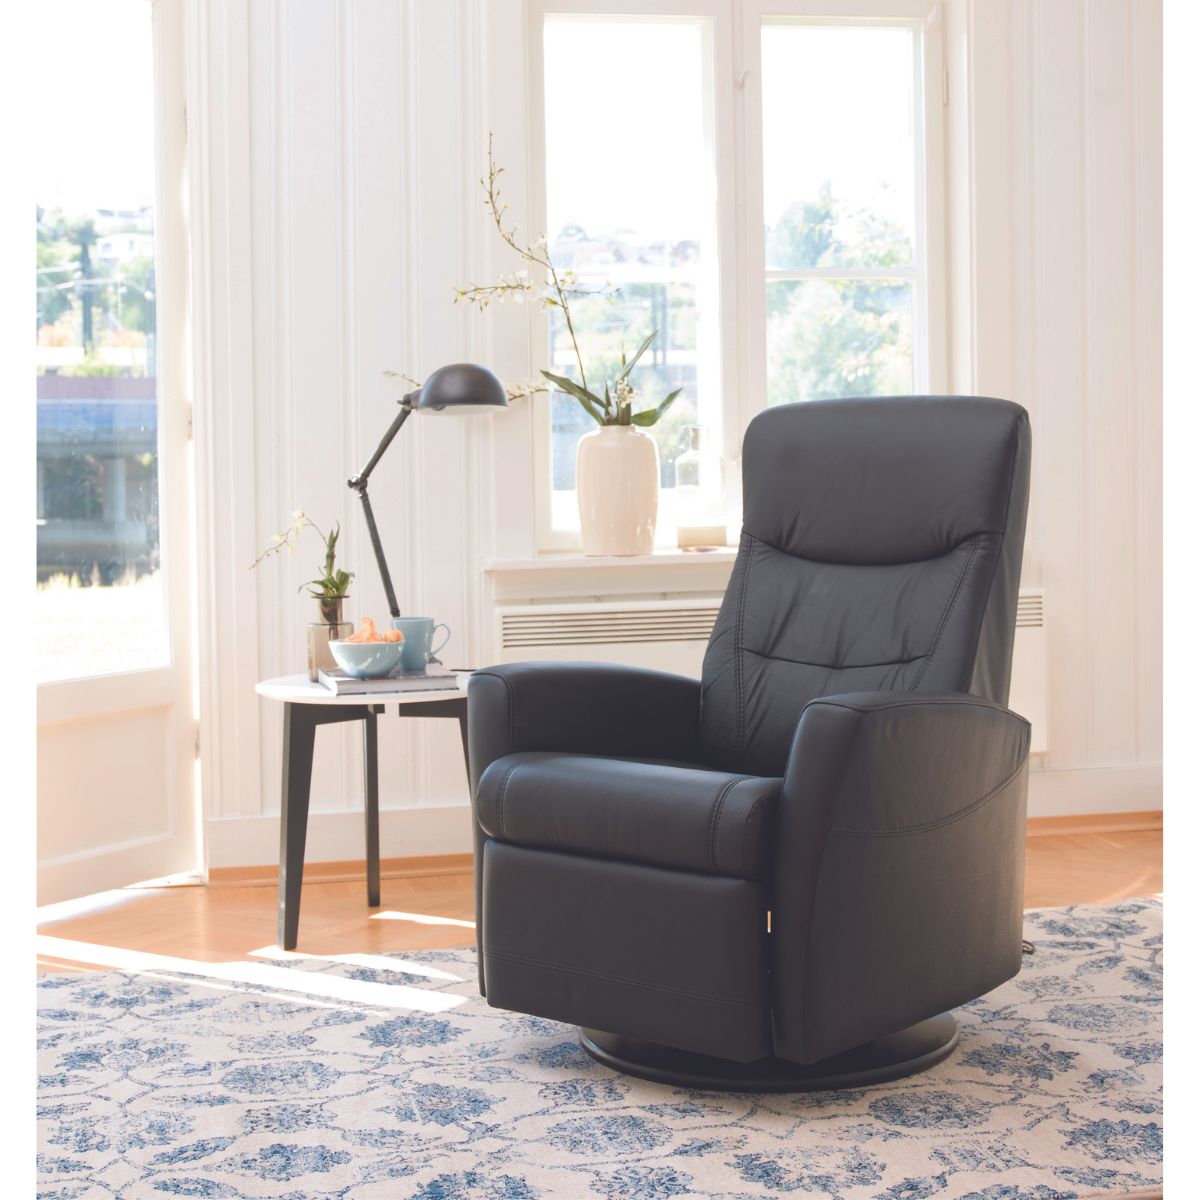 OSLO Large Swing Relaxer Recliner